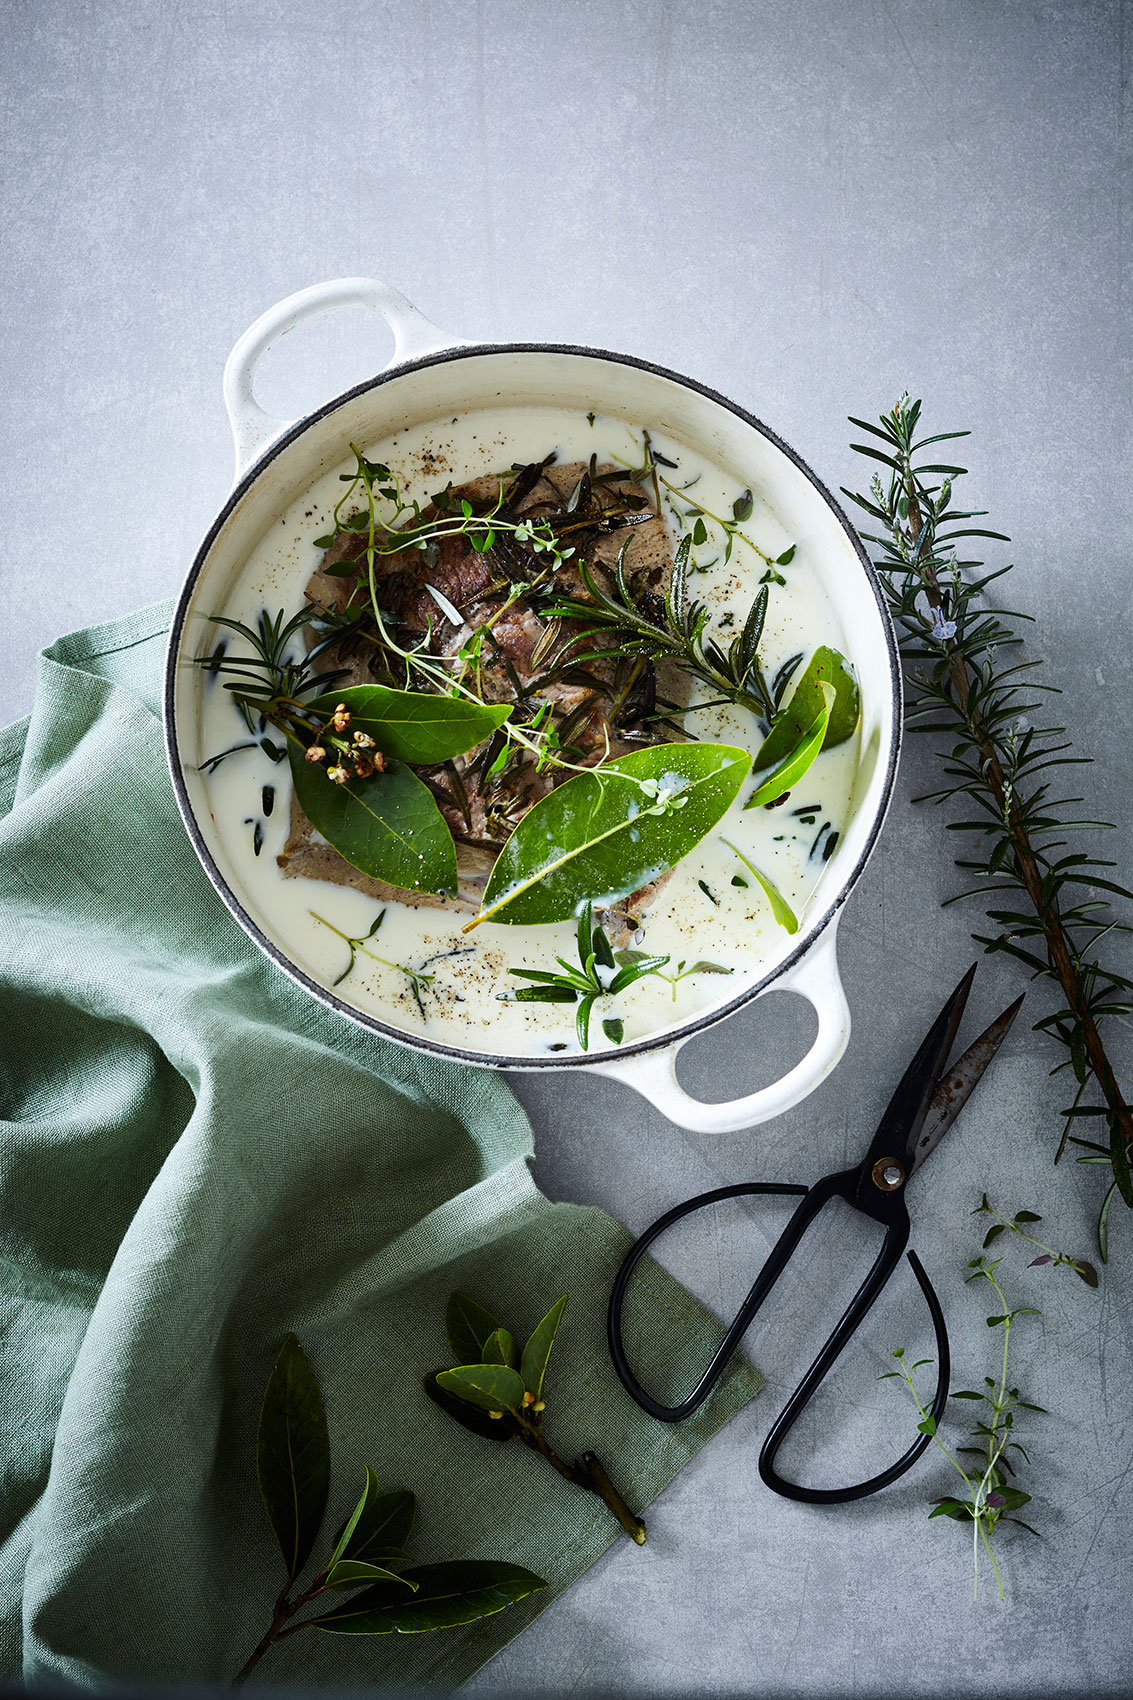 Slow Cooked • Milk Poached Pork with Freshly Cut Herbs in Enamel Pot • Cookbook & Editorial Food Photography